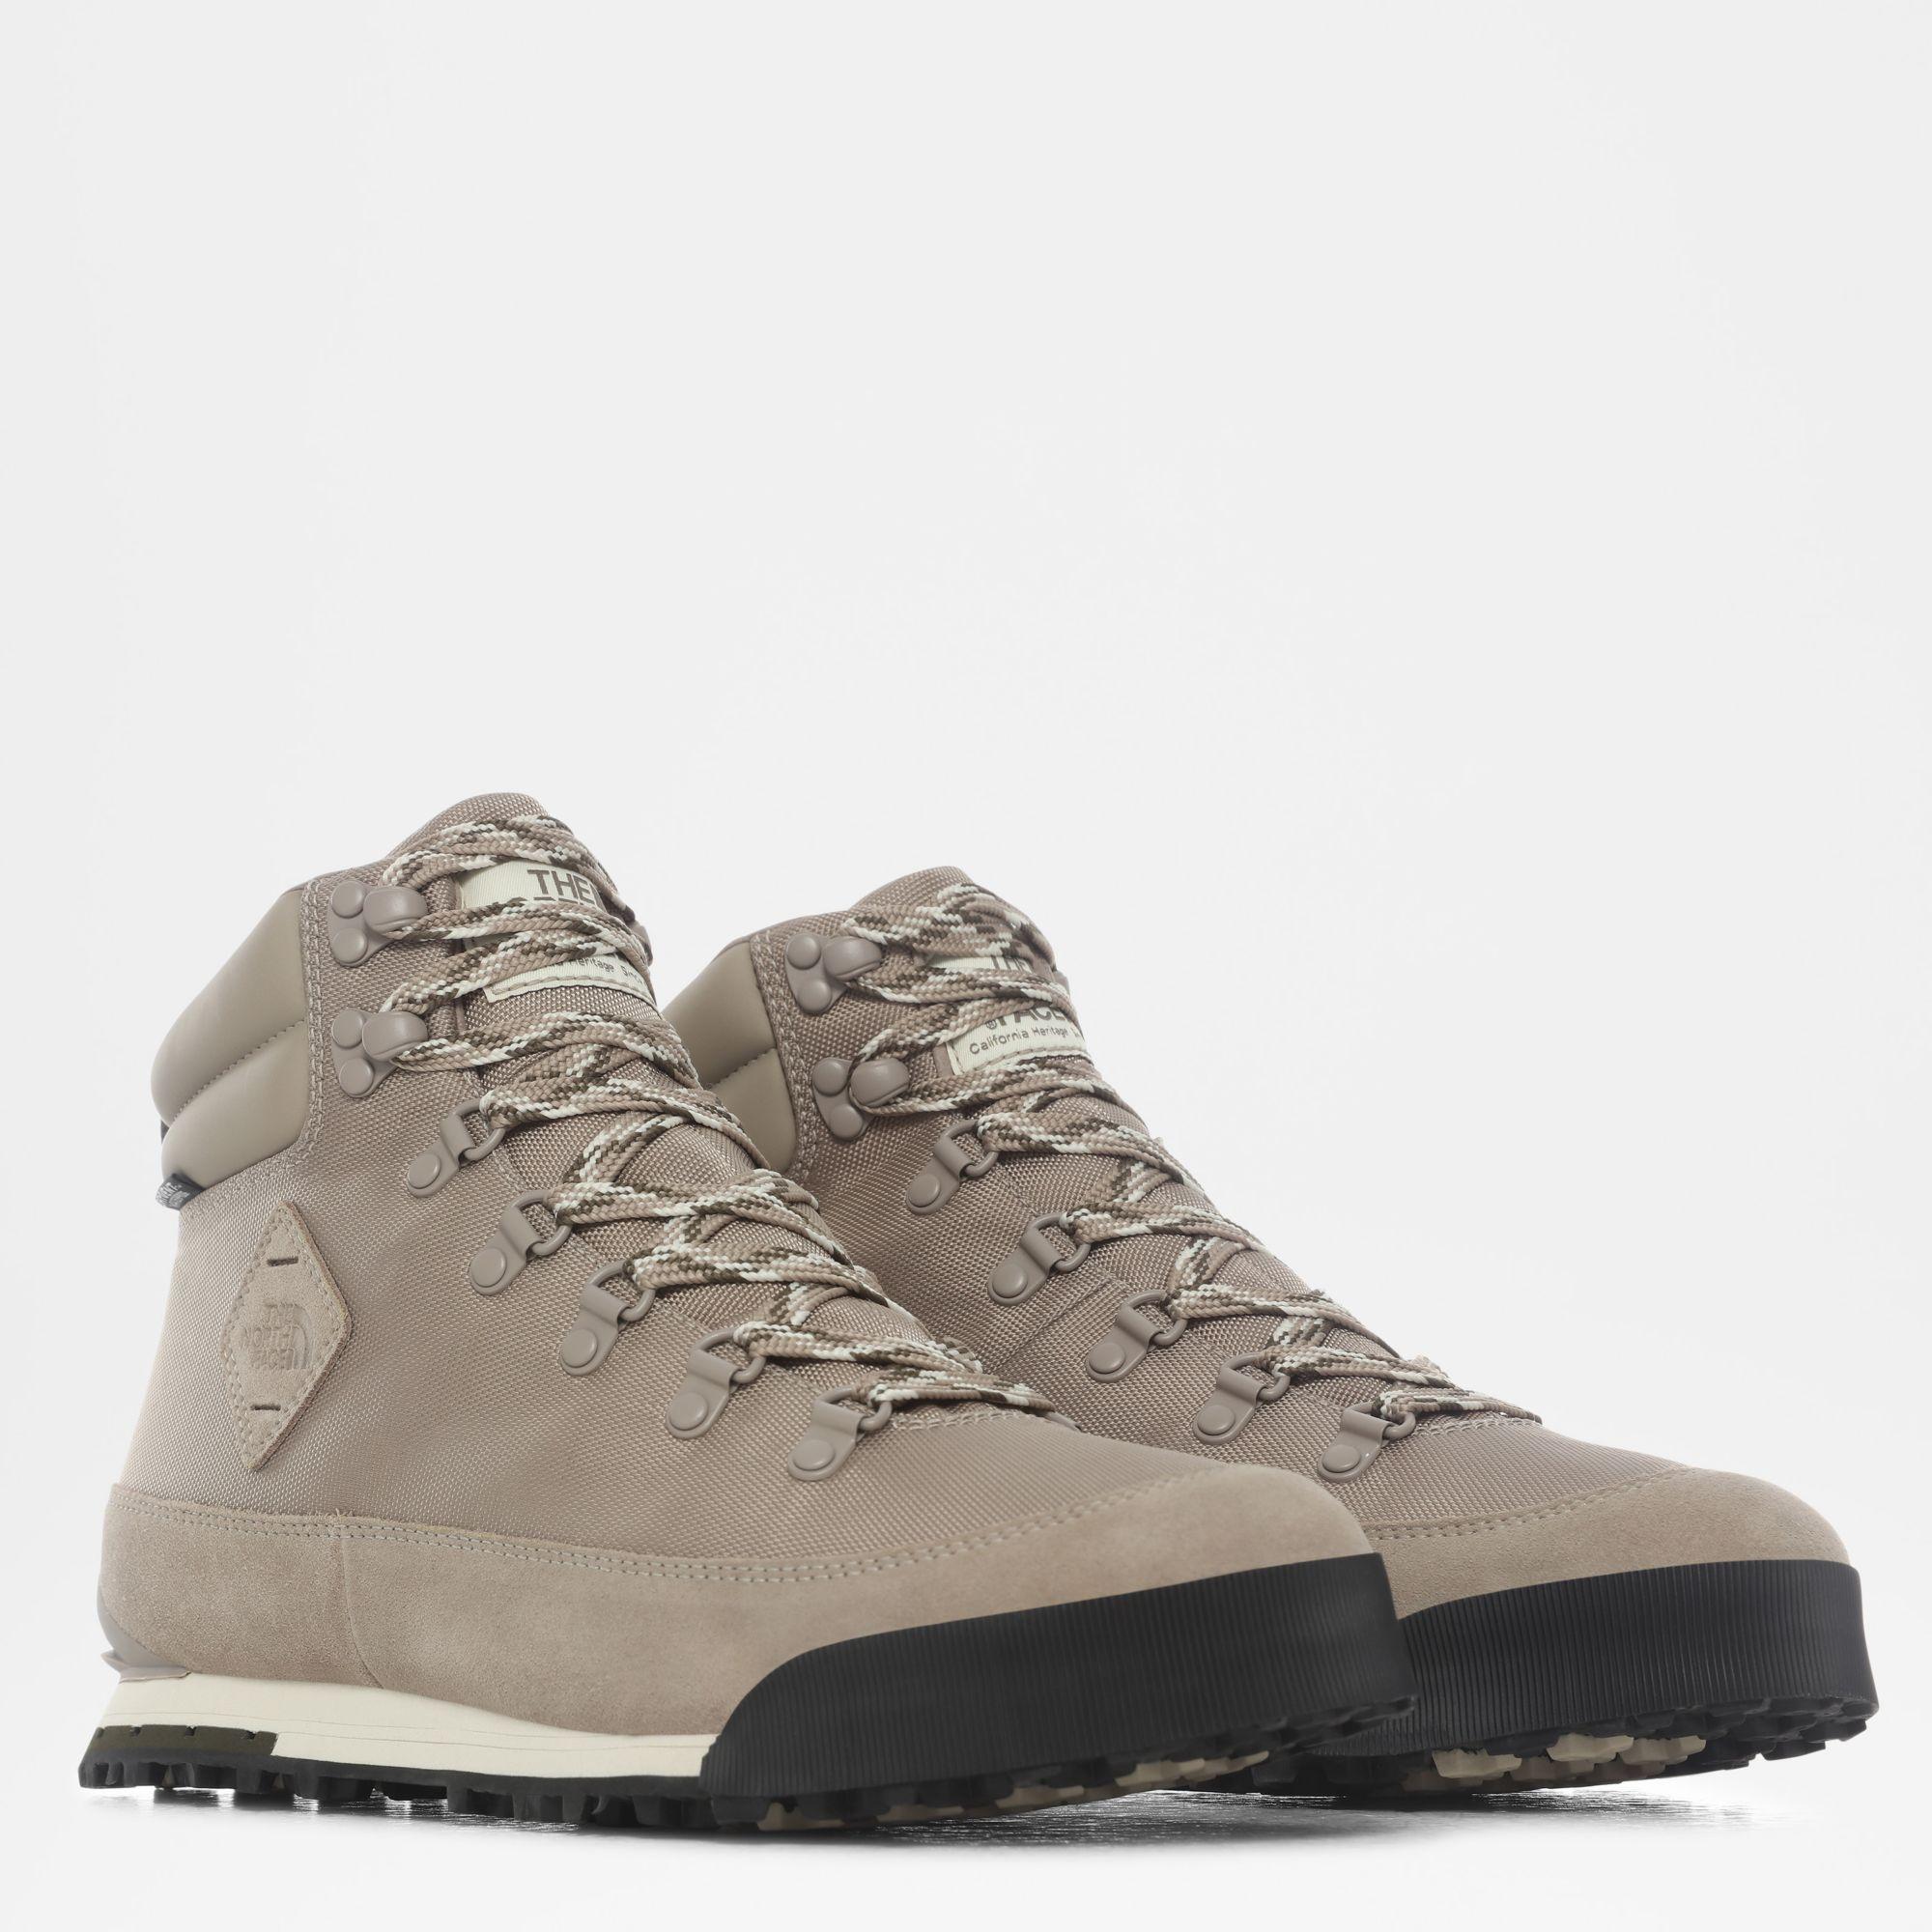 Peregrination spellen Goed opgeleid The North Face Men's Back-to-berkeley Nl Boots Vintage Khaki/new Taupe in  Green for Men - Lyst